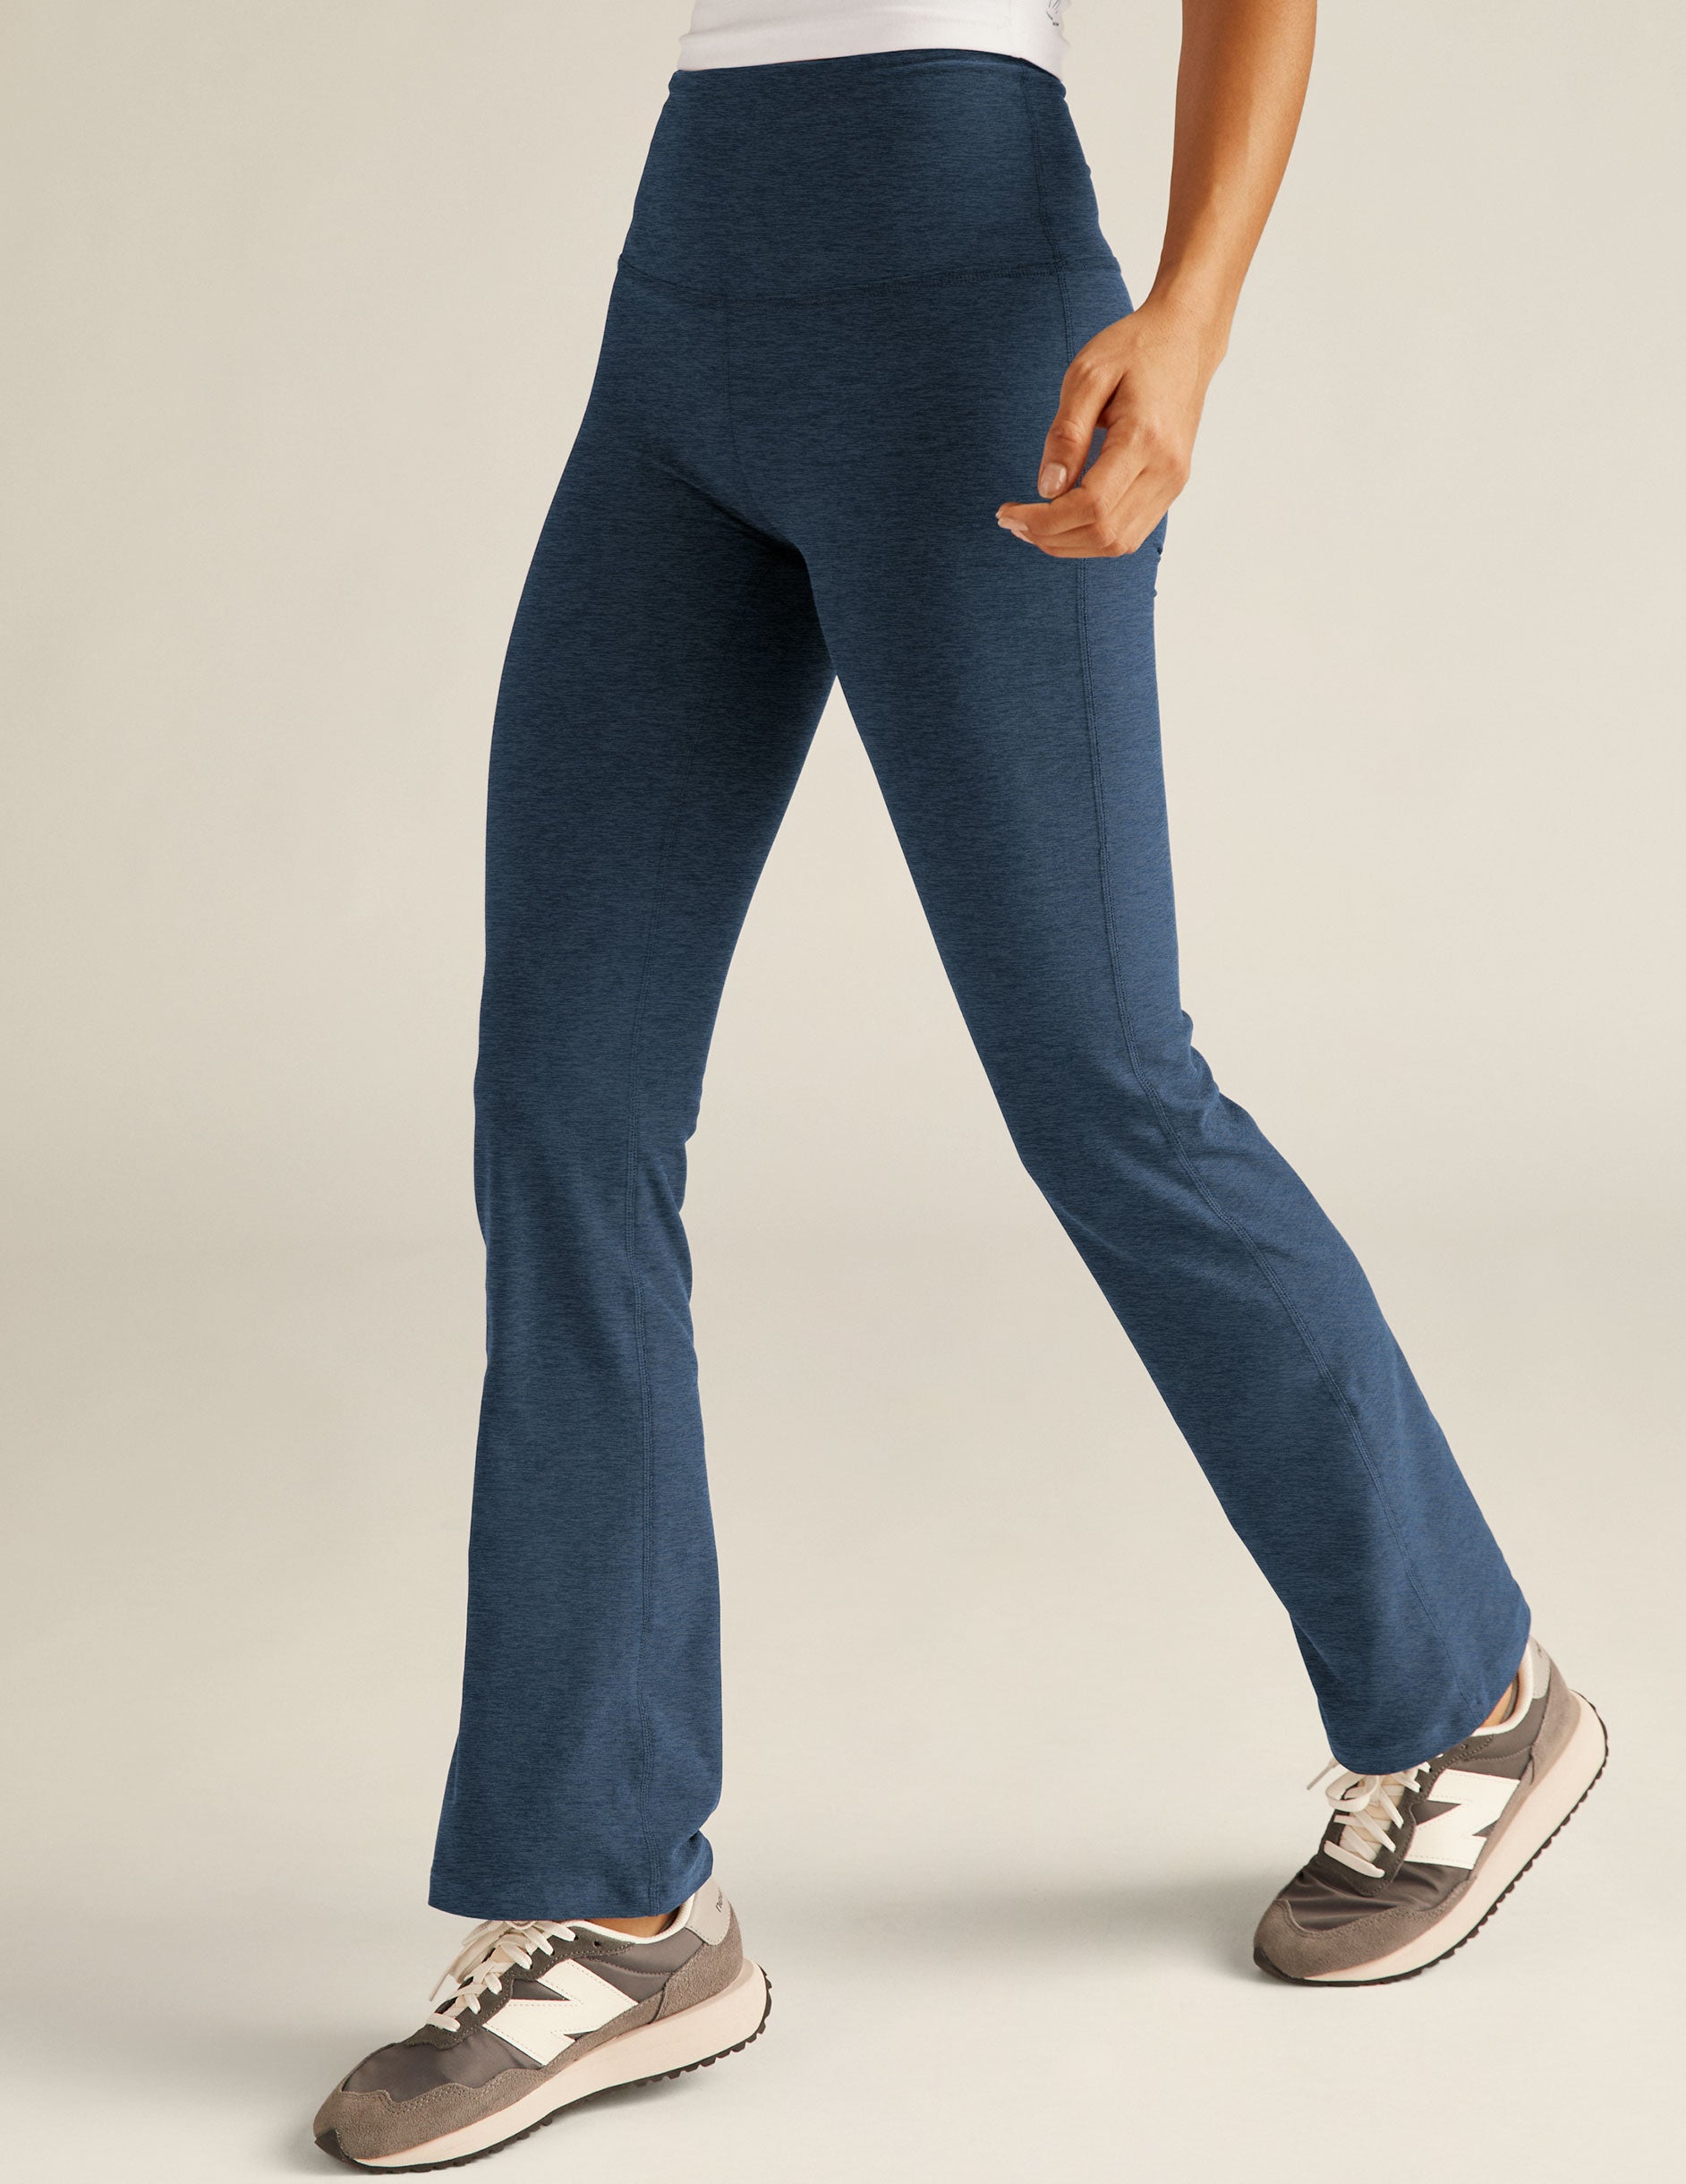 Spacedye Practice High Waisted Bootcut Pant